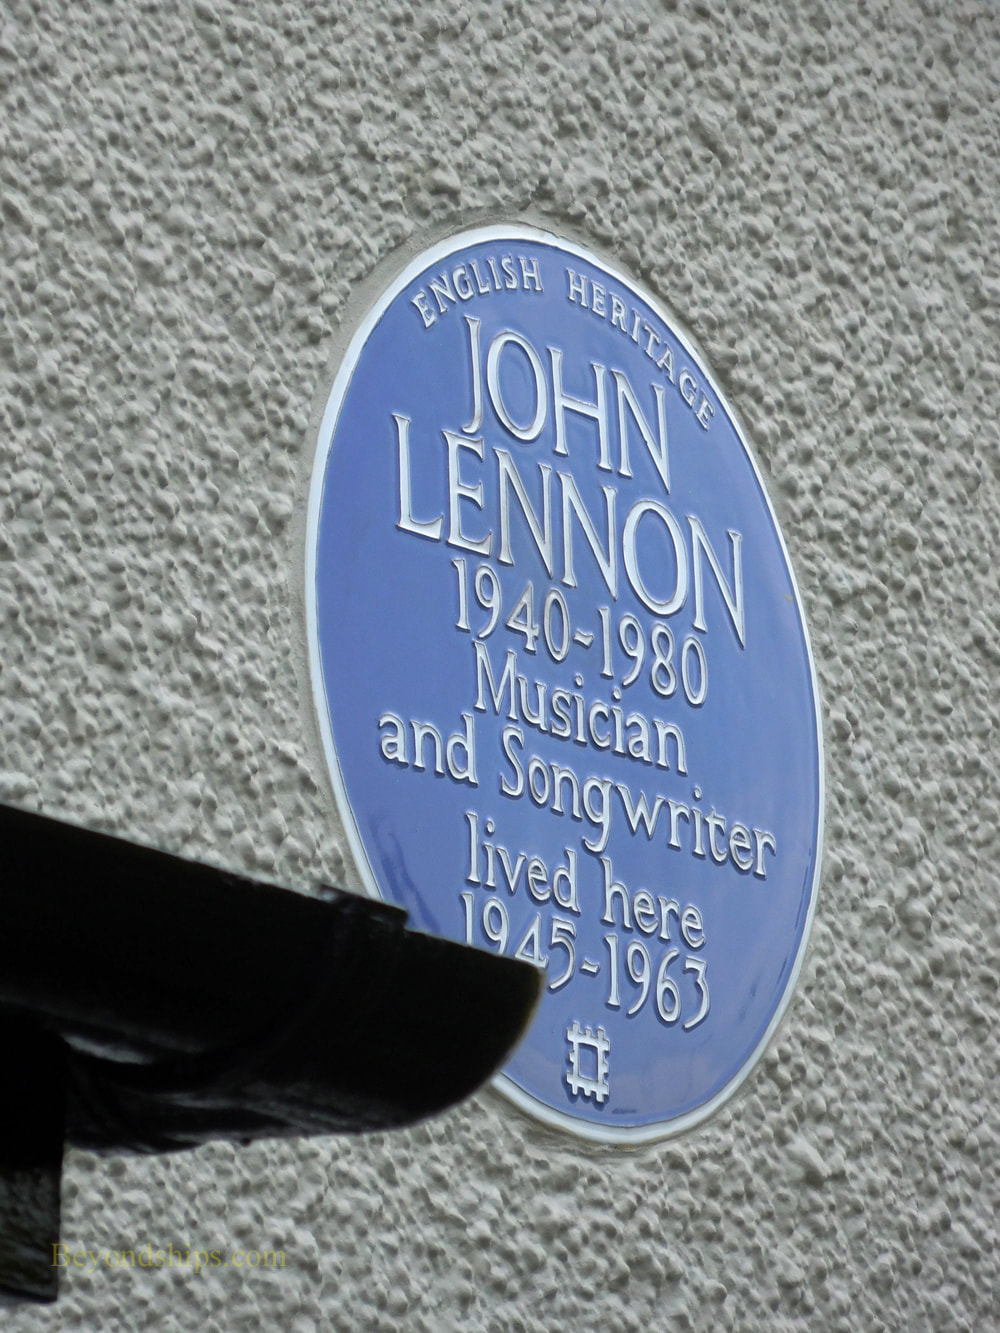 Blue plaque showing that Jon Lennon lived at Menips, Liverpool England